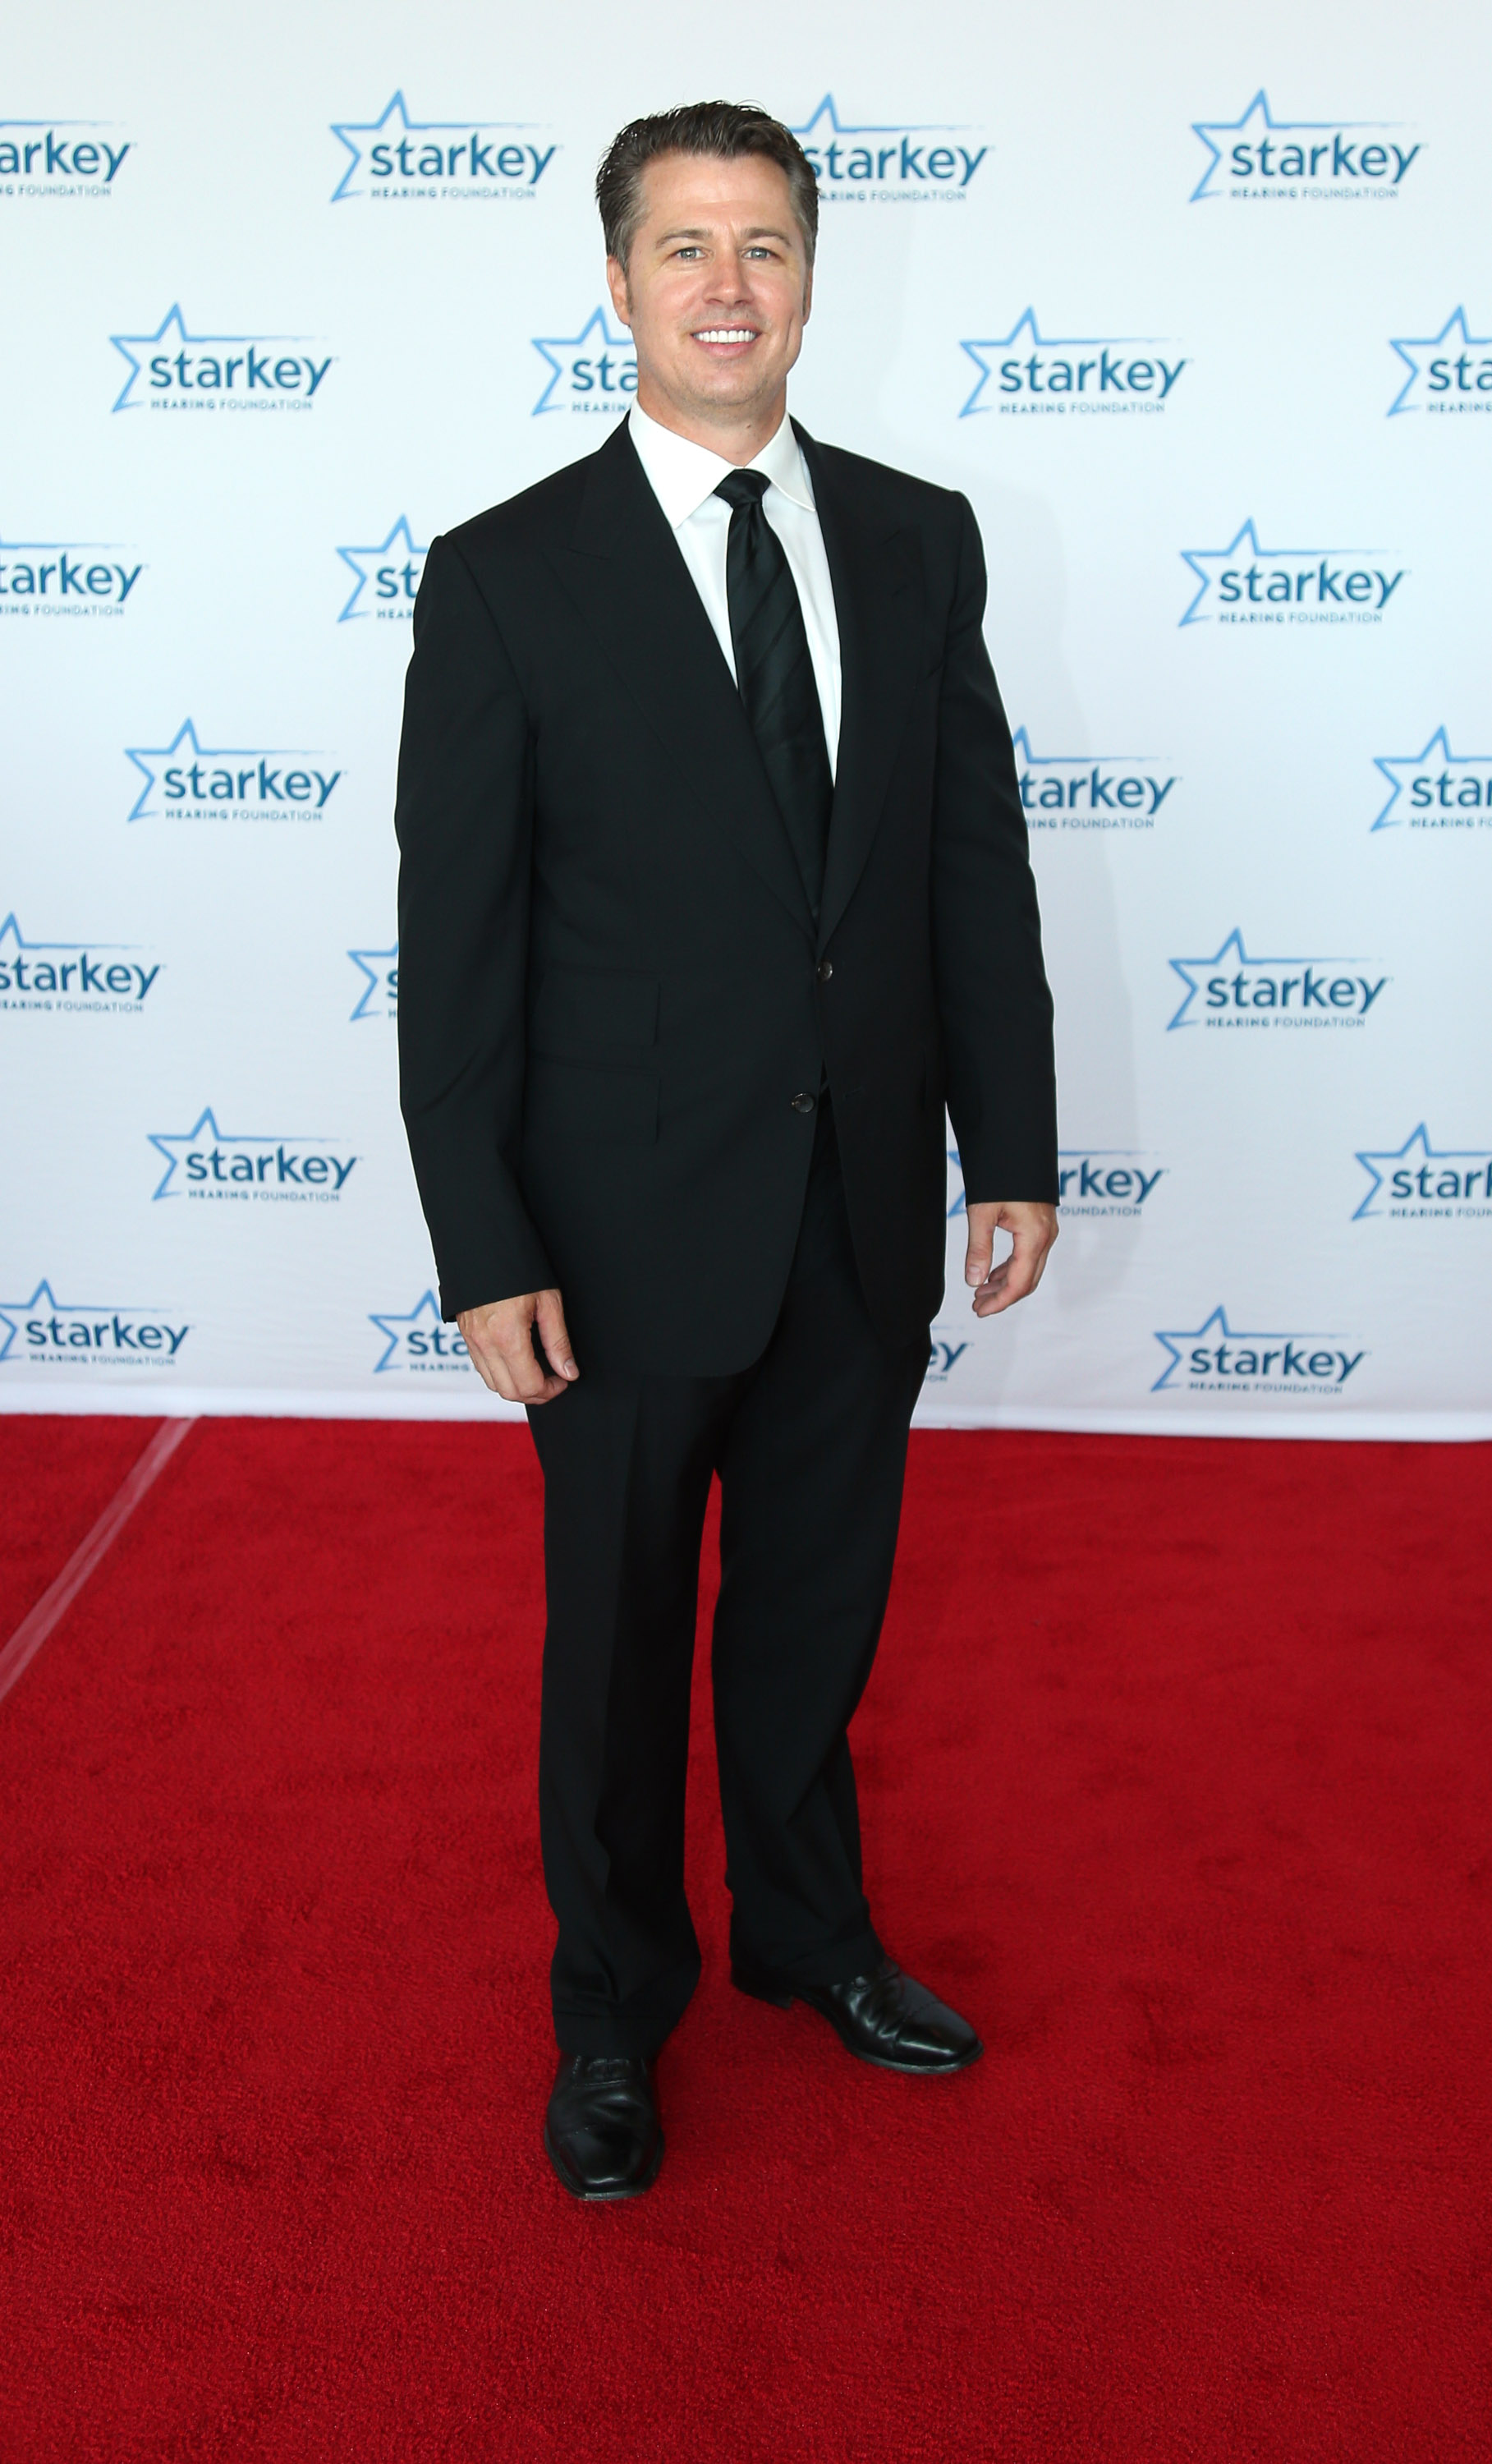 Doug Pitt graces the red carpet during the 2014 Starkey Hearing Foundation So The World May Hear Awards Gala, which took place at the St. Paul River Centre in Minnesota on July 20, 2014 | Source: Getty Images